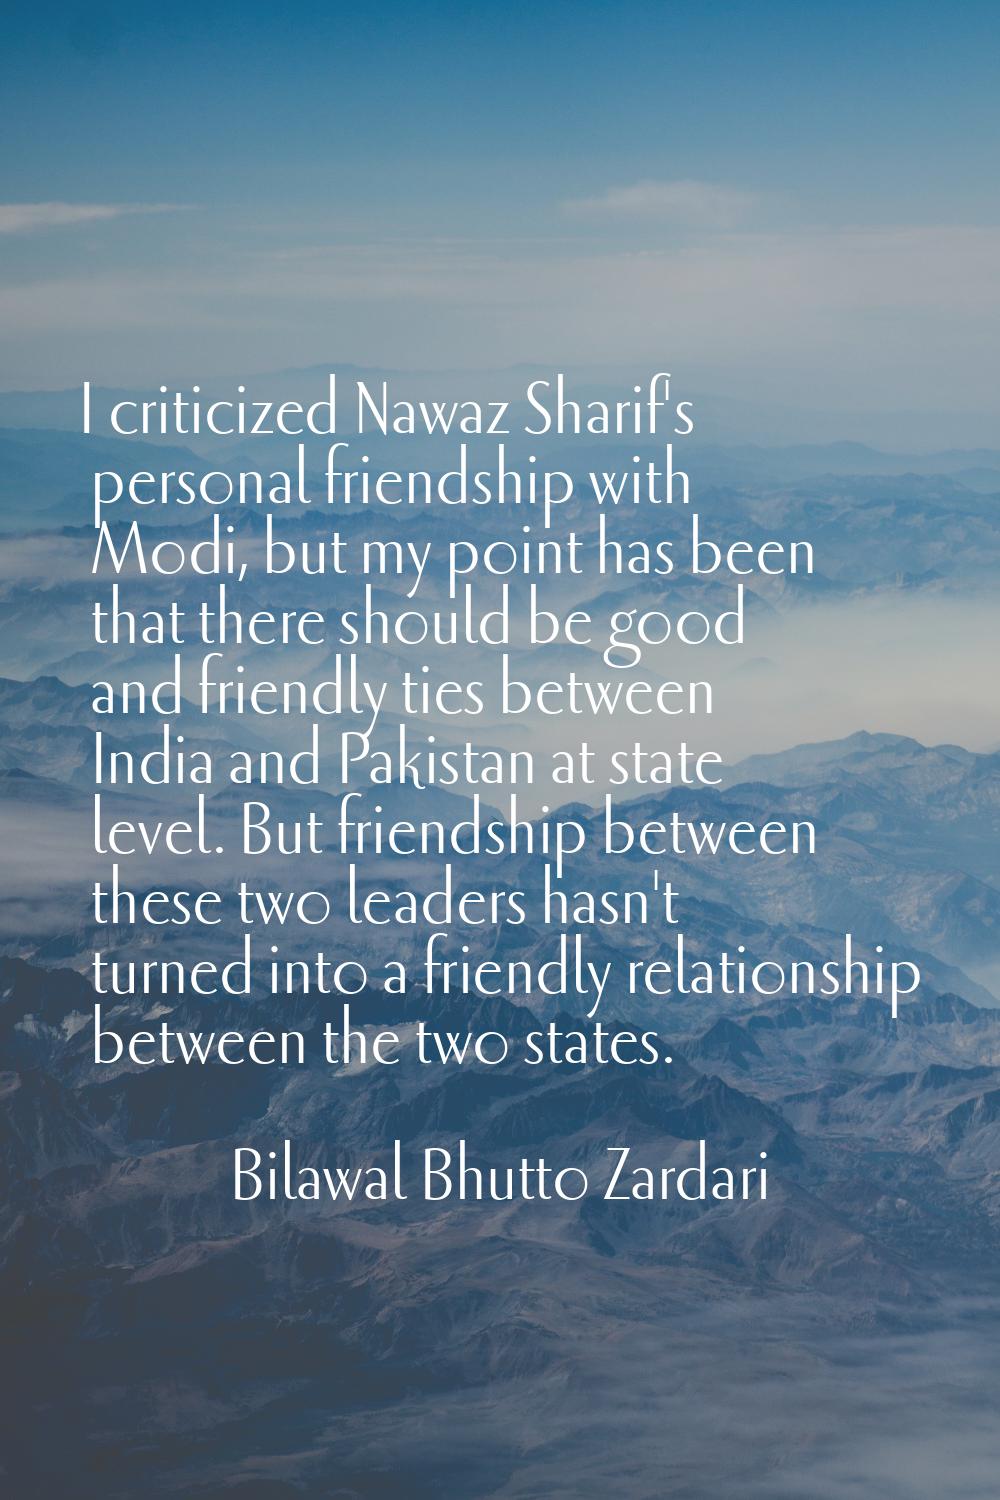 I criticized Nawaz Sharif's personal friendship with Modi, but my point has been that there should 